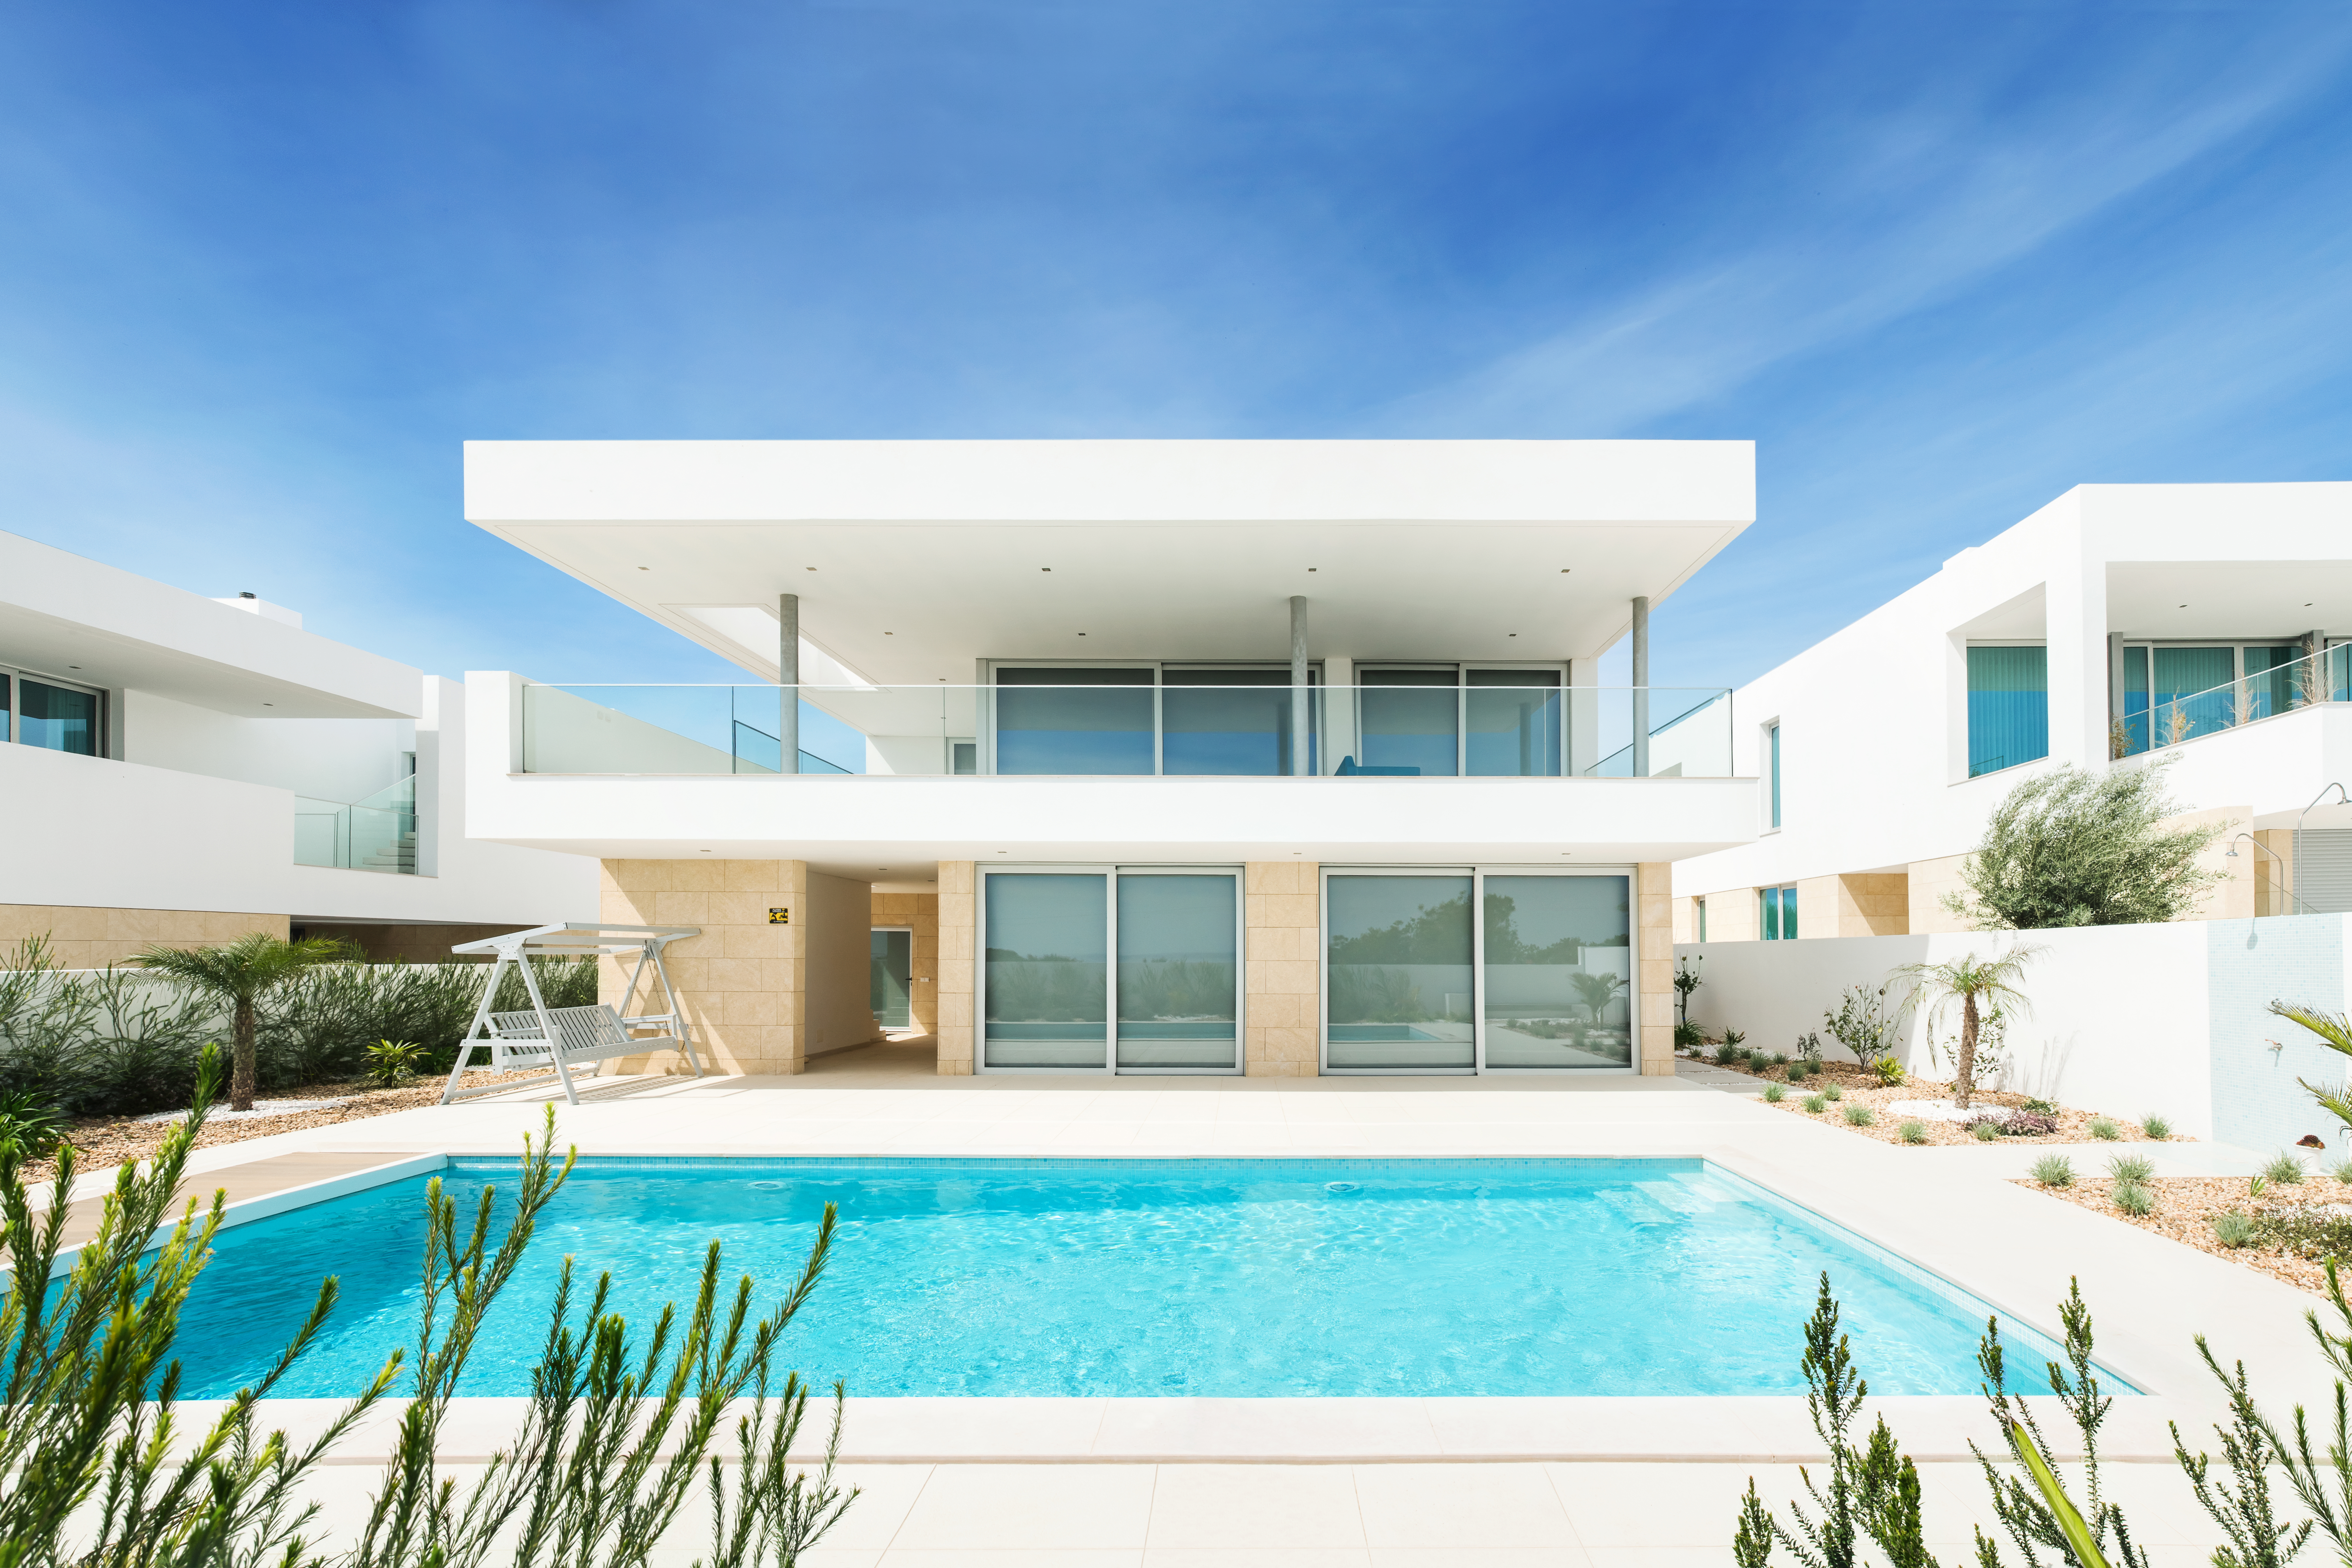 Portuguese real estate, upon purchase of which you can obtain a residence permit in Portugal